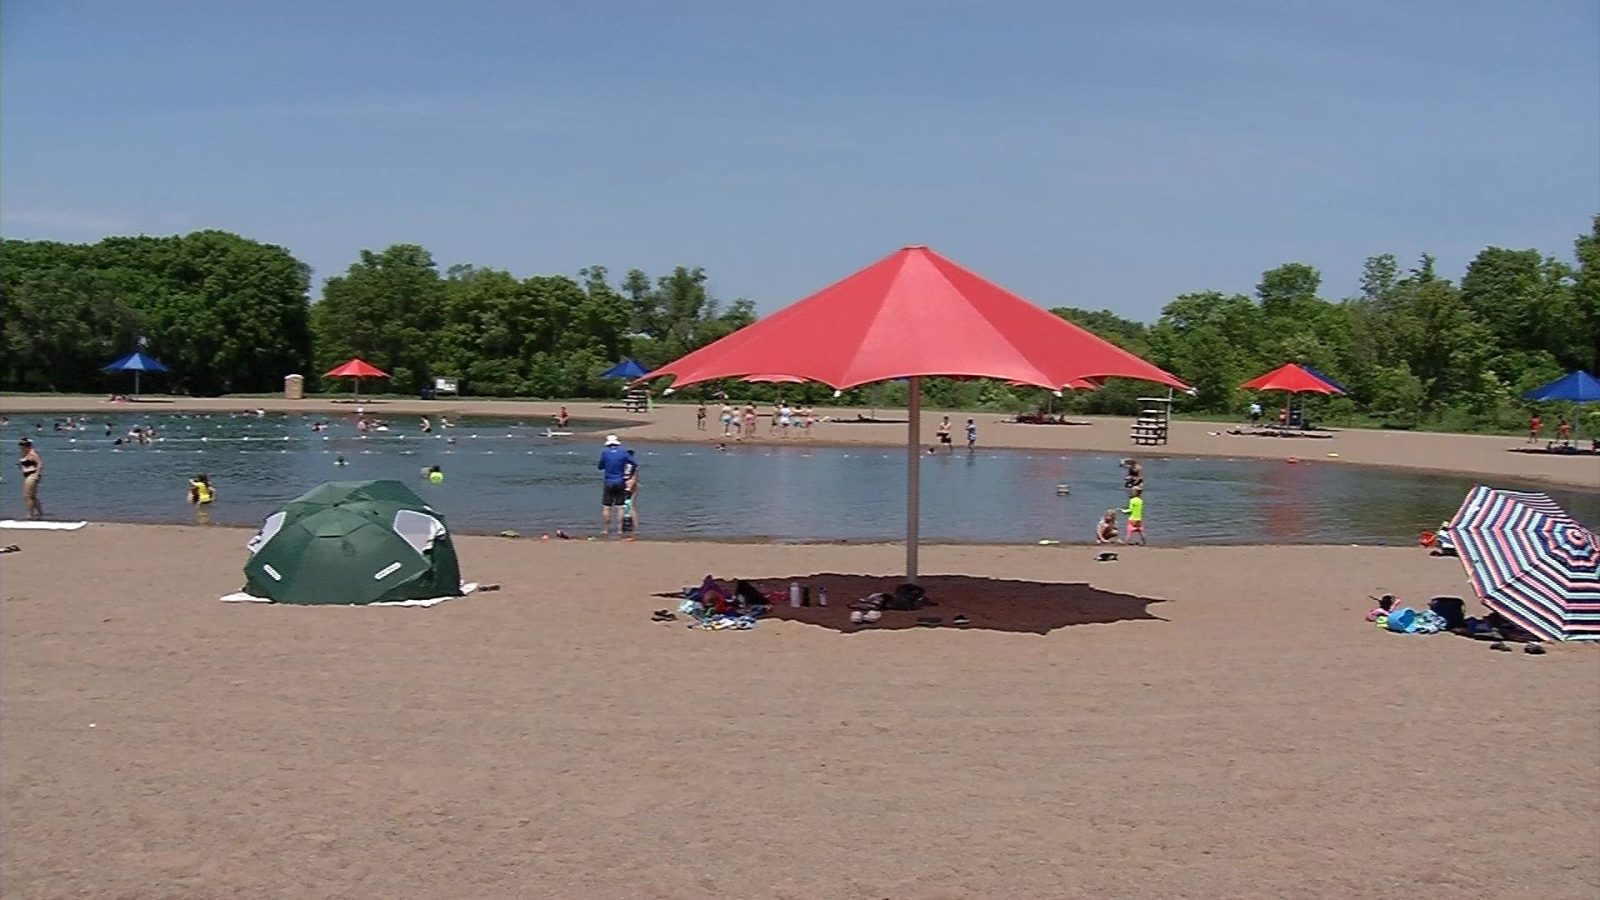 Lifeguard shortage affecting area the swimming pond at Elm Creek Park Reserve.